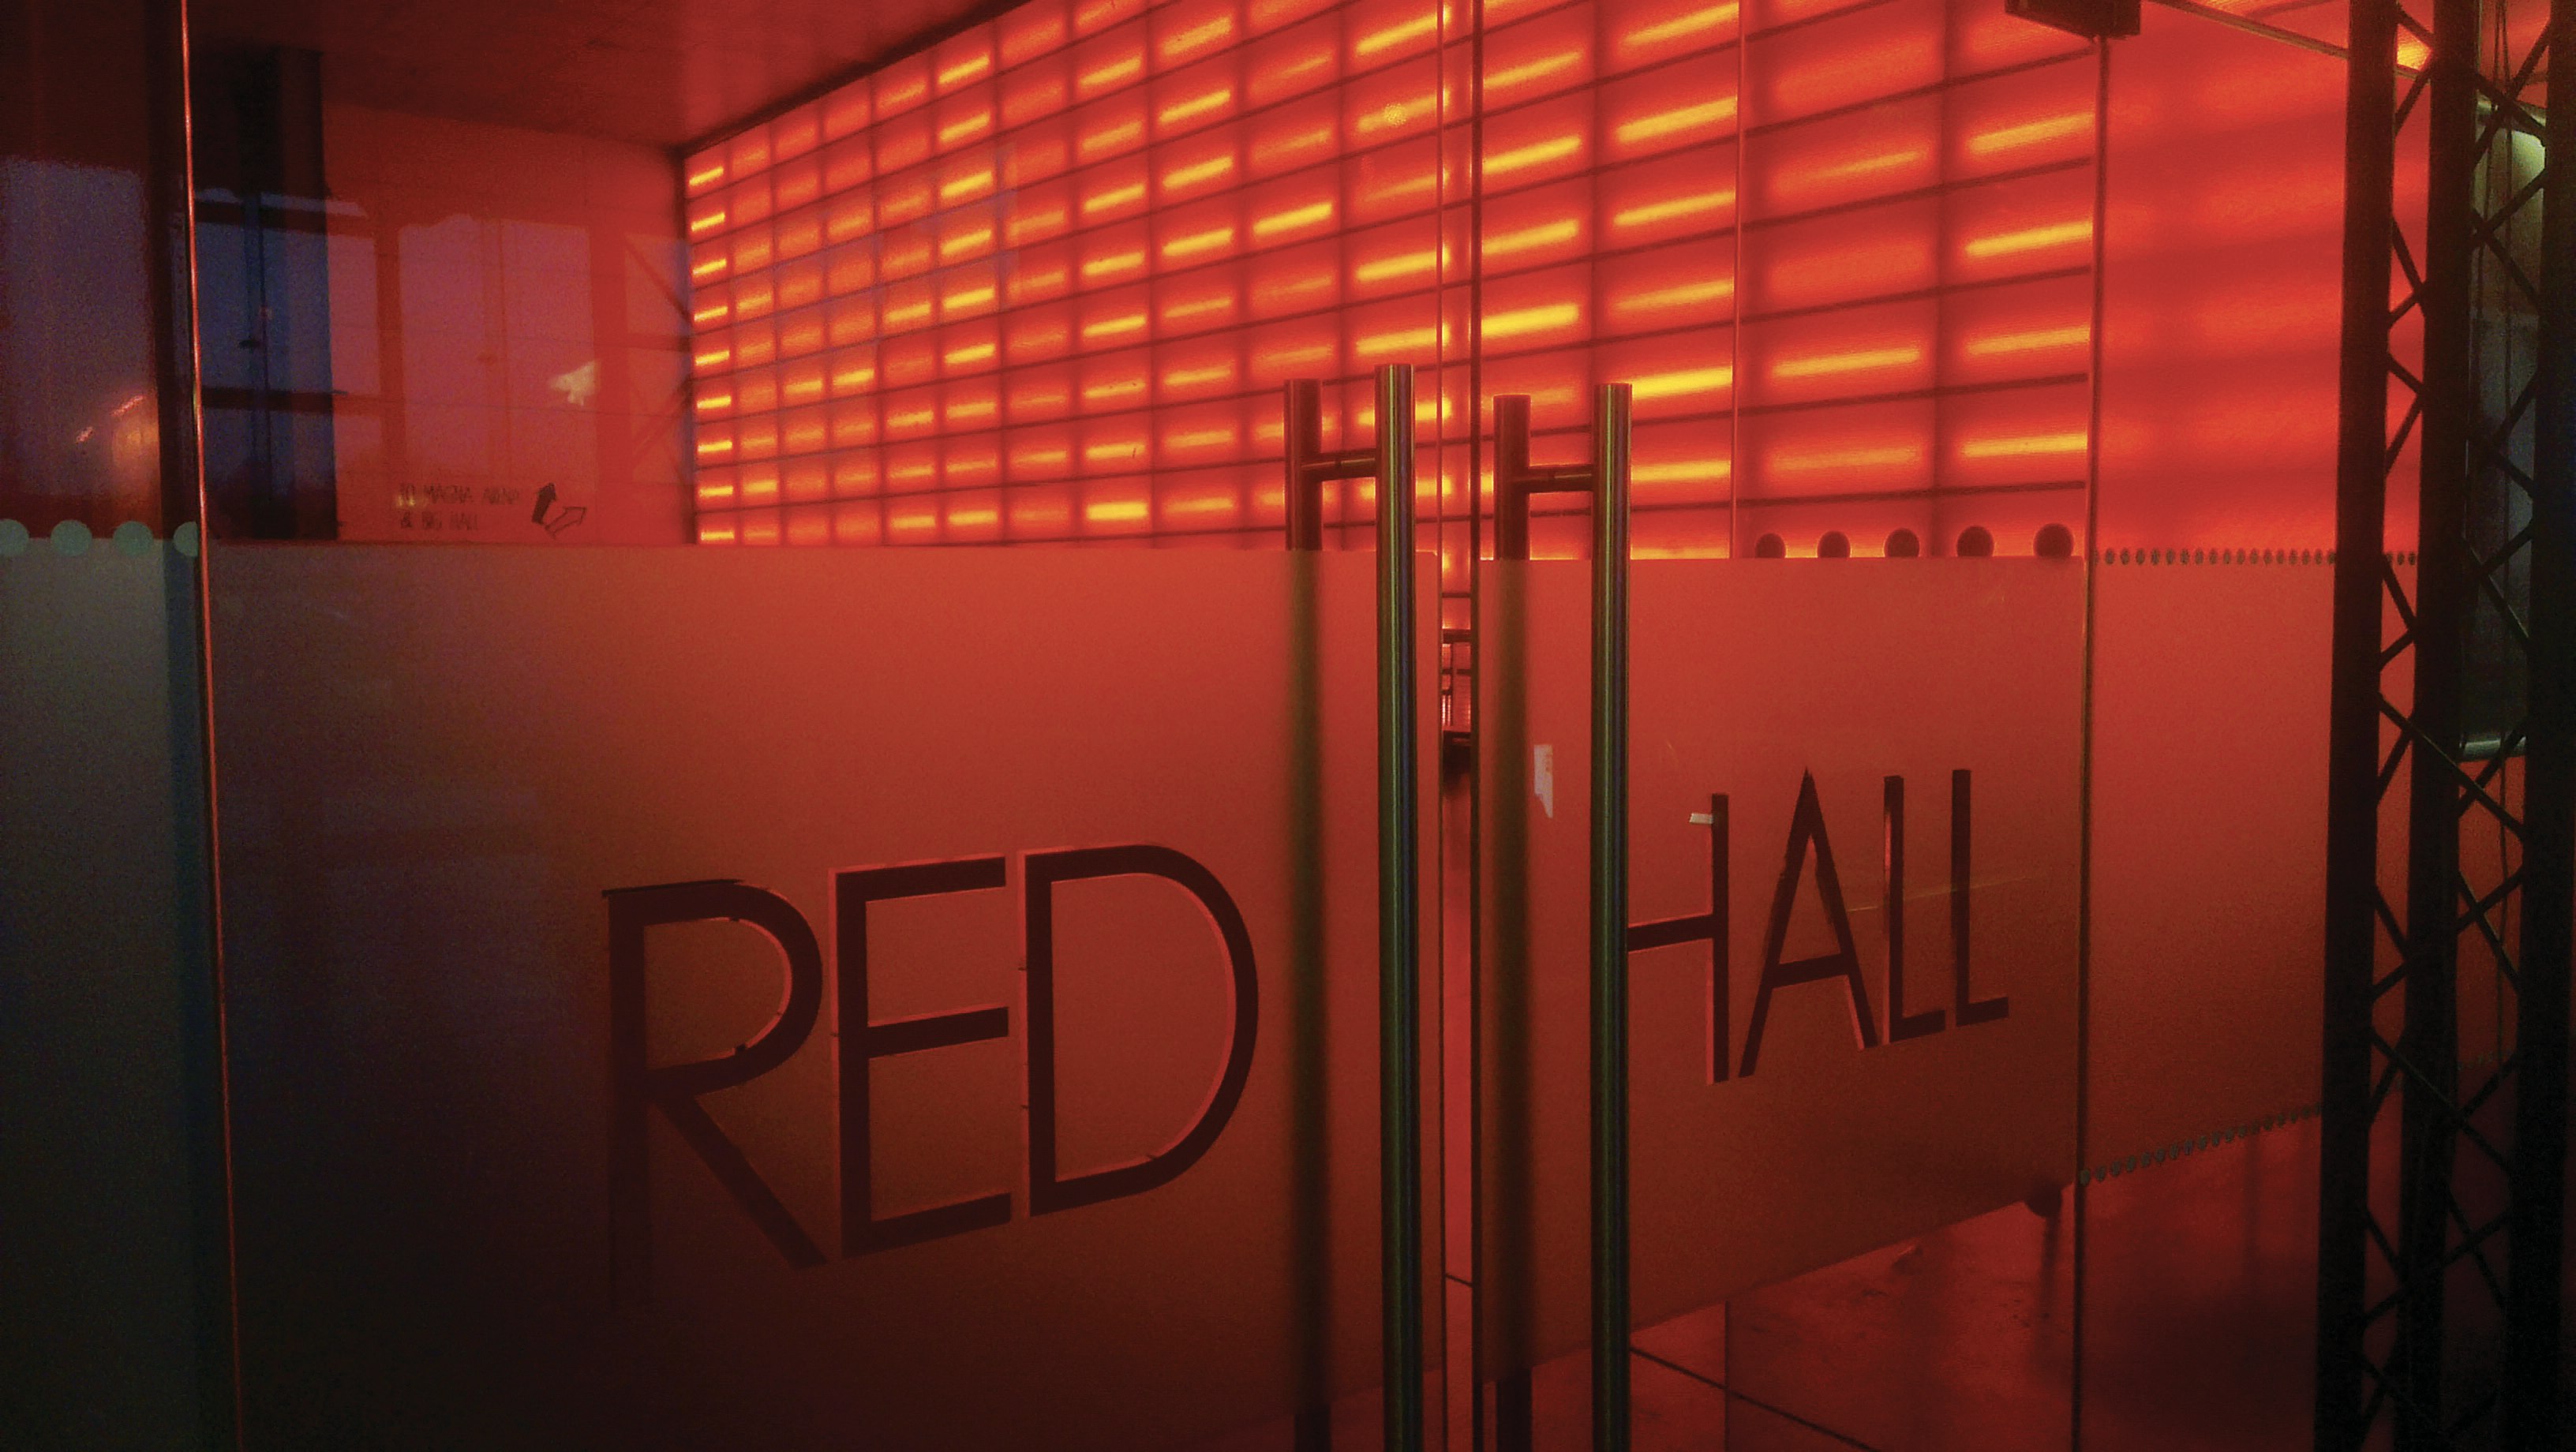 MAGNA  - The Red Hall image 2